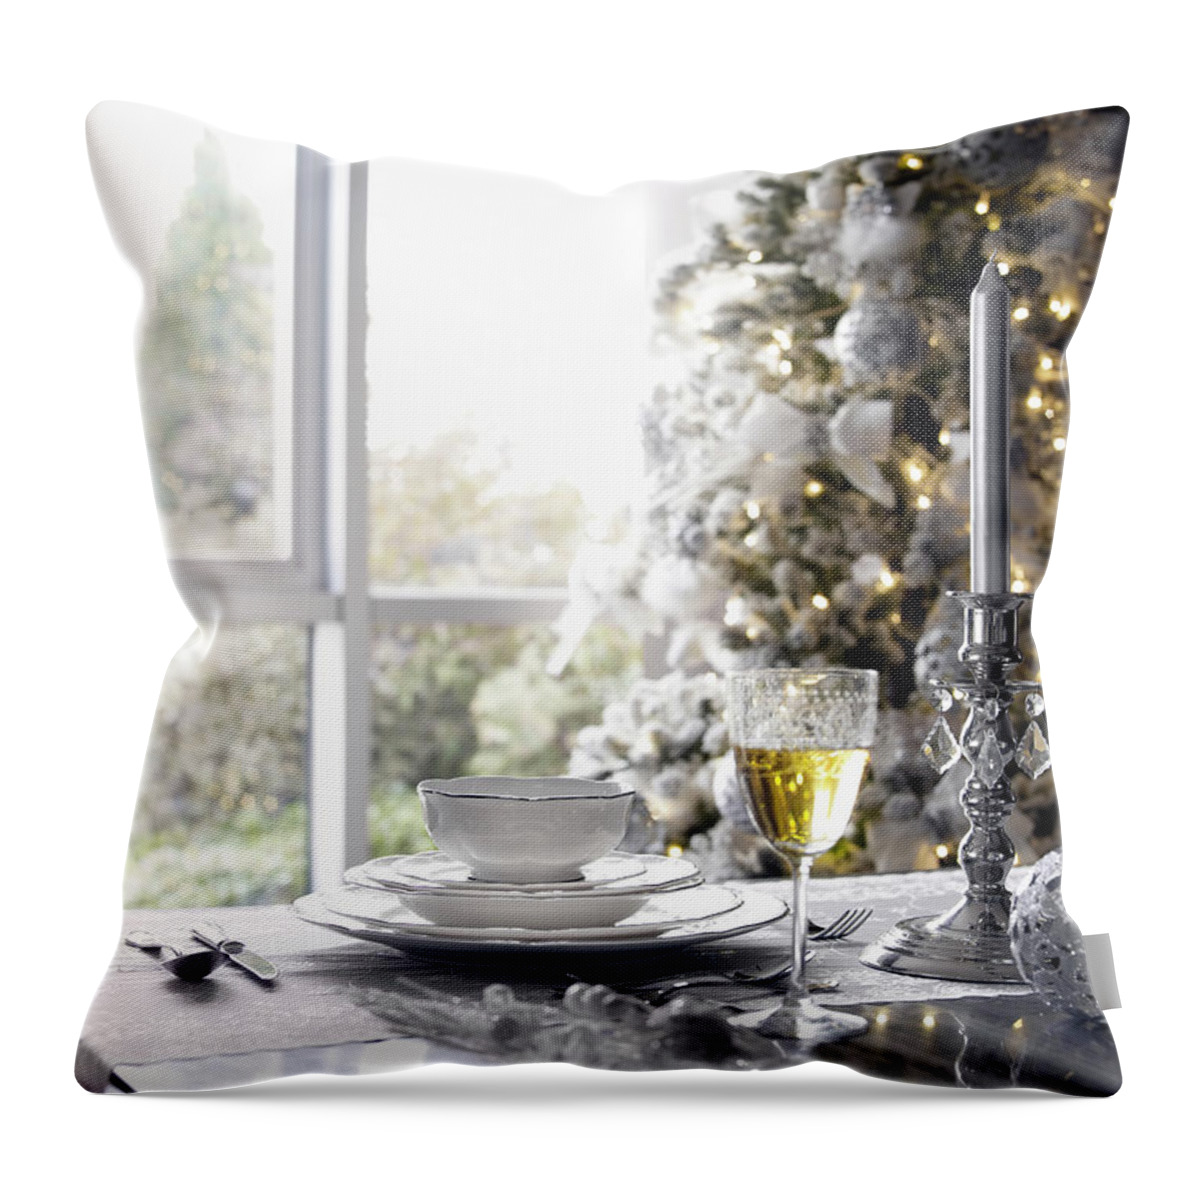 Dining Room Throw Pillow featuring the photograph Ornate Table Settings In Dining Room by Jazzirt